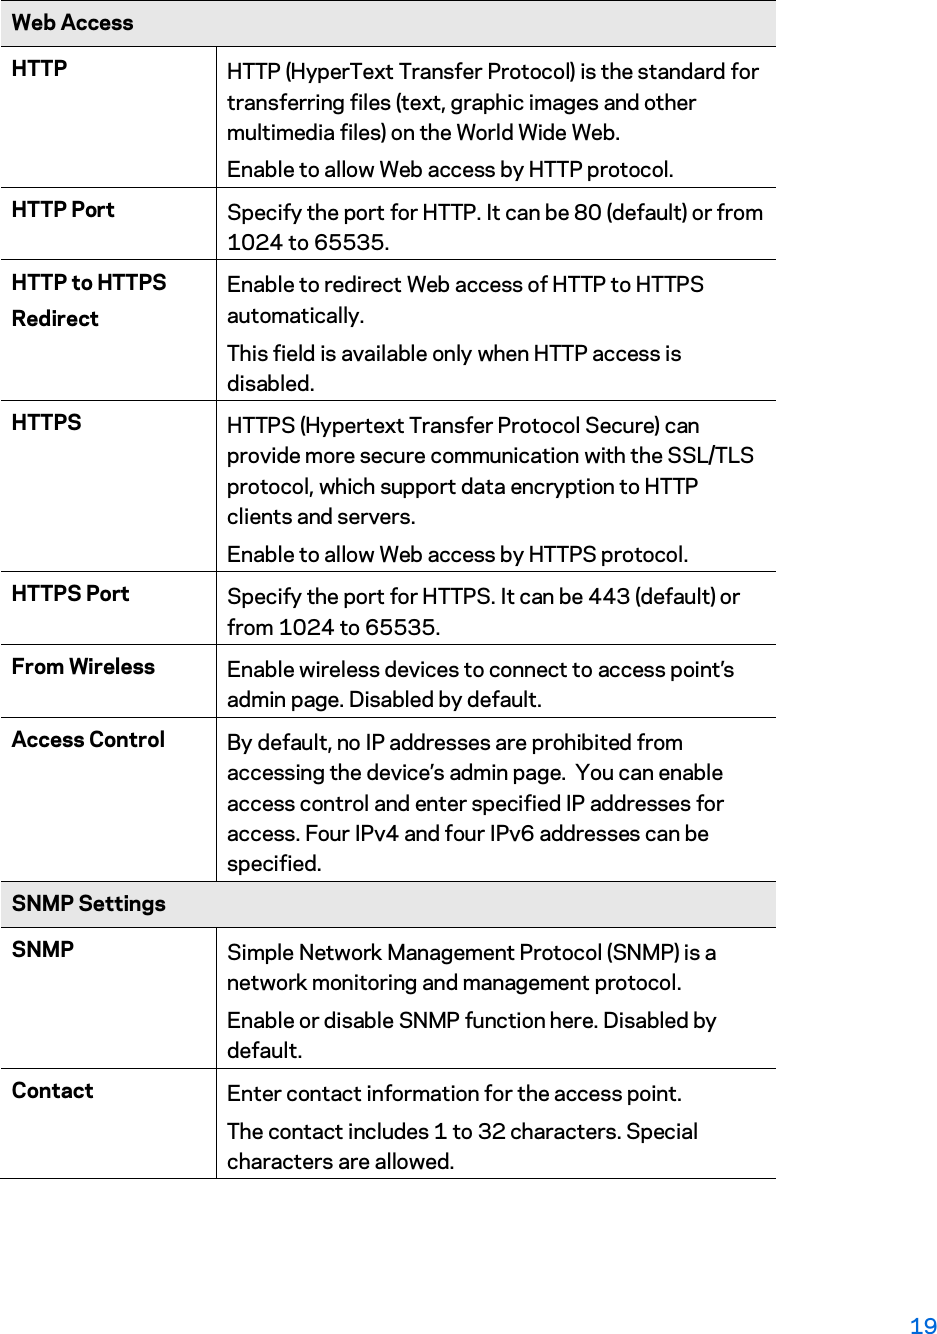 Web Access HTTP  HTTP (HyperText Transfer Protocol) is the standard for  transferring files (text, graphic images and other multimedia files) on the World Wide Web.  Enable to allow Web access by HTTP protocol. HTTP Port   Specify the port for HTTP. It can be 80 (default) or from 1024 to 65535.  HTTP to HTTPS Redirect Enable to redirect Web access of HTTP to HTTPS automatically.  This field is available only when HTTP access is disabled. HTTPS  HTTPS (Hypertext Transfer Protocol Secure) can provide more secure communication with the SSL/TLS protocol, which support data encryption to HTTP clients and servers. Enable to allow Web access by HTTPS protocol. HTTPS Port   Specify the port for HTTPS. It can be 443 (default) or from 1024 to 65535.  From Wireless  Enable wireless devices to connect to access point’s admin page. Disabled by default. Access Control  By default, no IP addresses are prohibited from accessing the device’s admin page.  You can enable access control and enter specified IP addresses for access. Four IPv4 and four IPv6 addresses can be specified. SNMP Settings SNMP  Simple Network Management Protocol (SNMP) is a network monitoring and management protocol. Enable or disable SNMP function here. Disabled by default. Contact  Enter contact information for the access point.  The contact includes 1 to 32 characters. Special characters are allowed. 19 